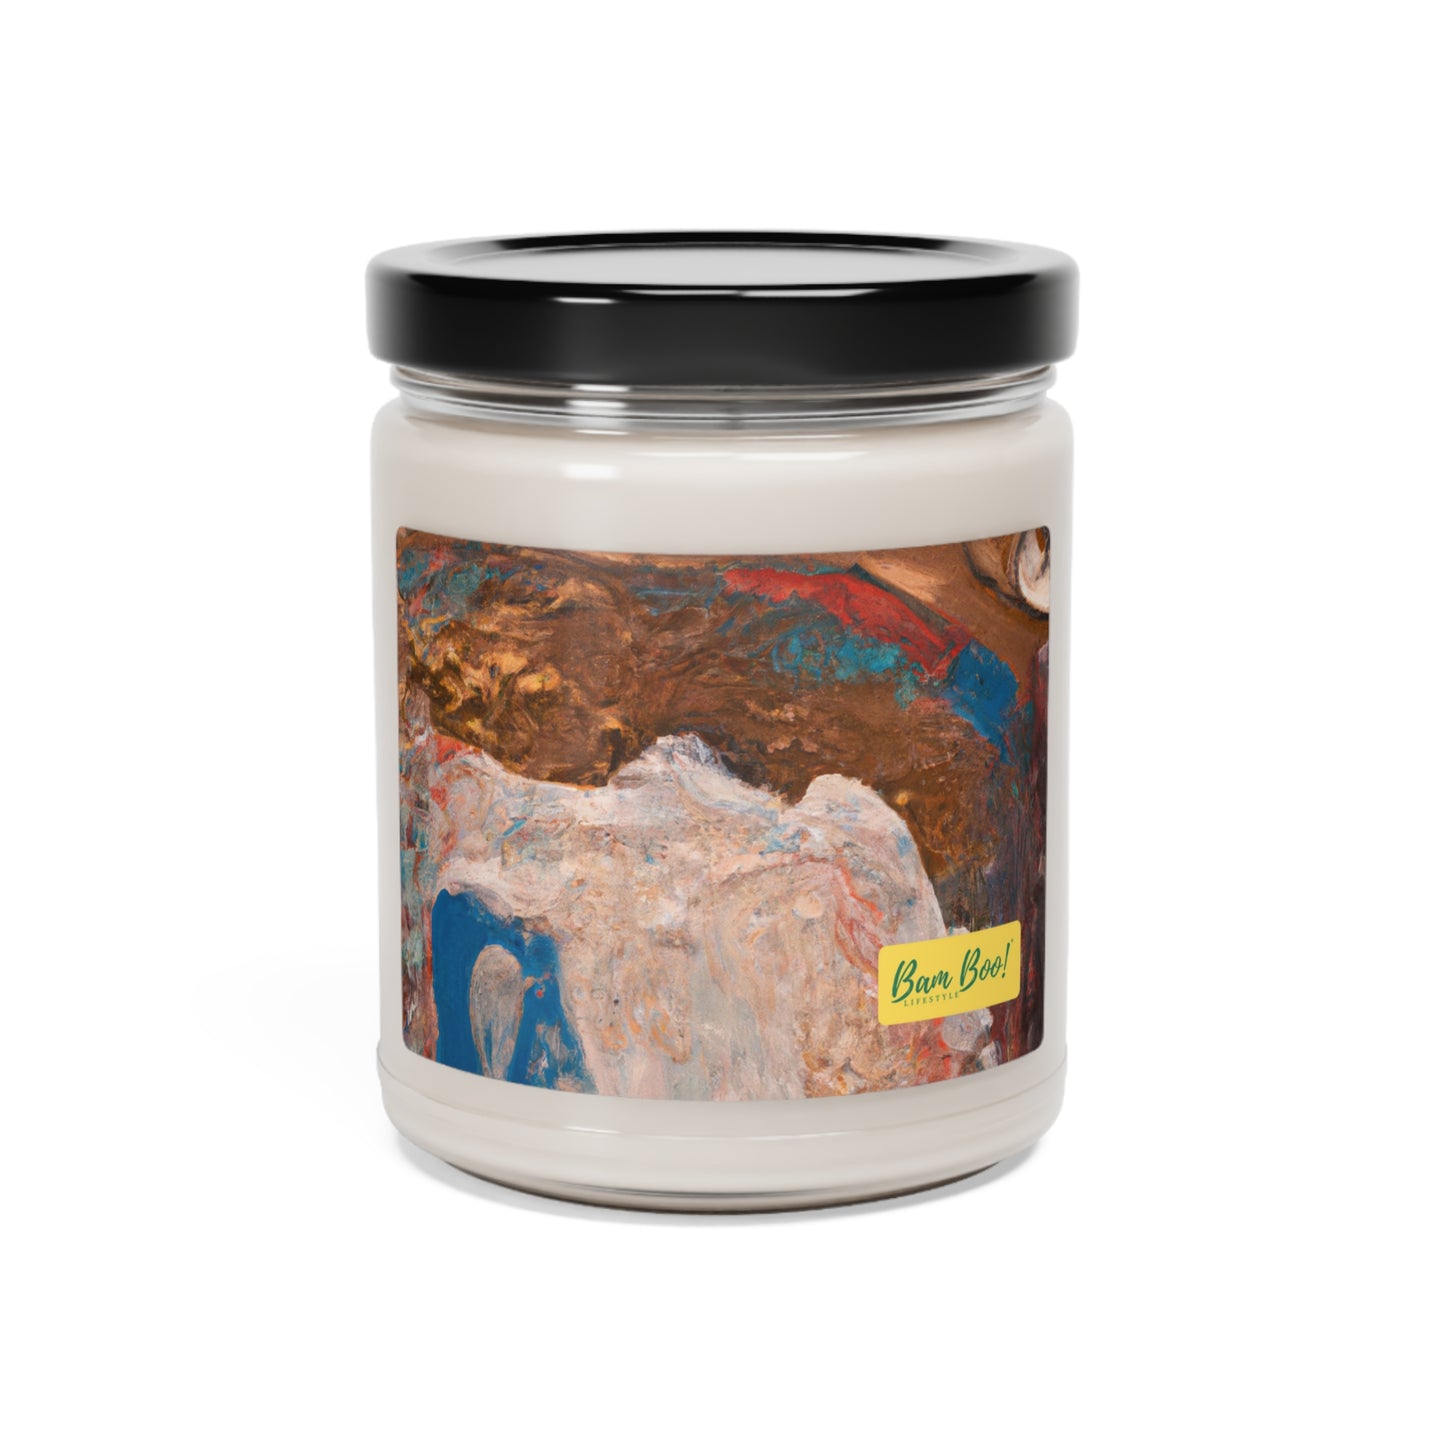 "Mixed Media Expression: Exploring Nature Through Abstract Landscapes" - Bam Boo! Lifestyle Eco-friendly Soy Candle